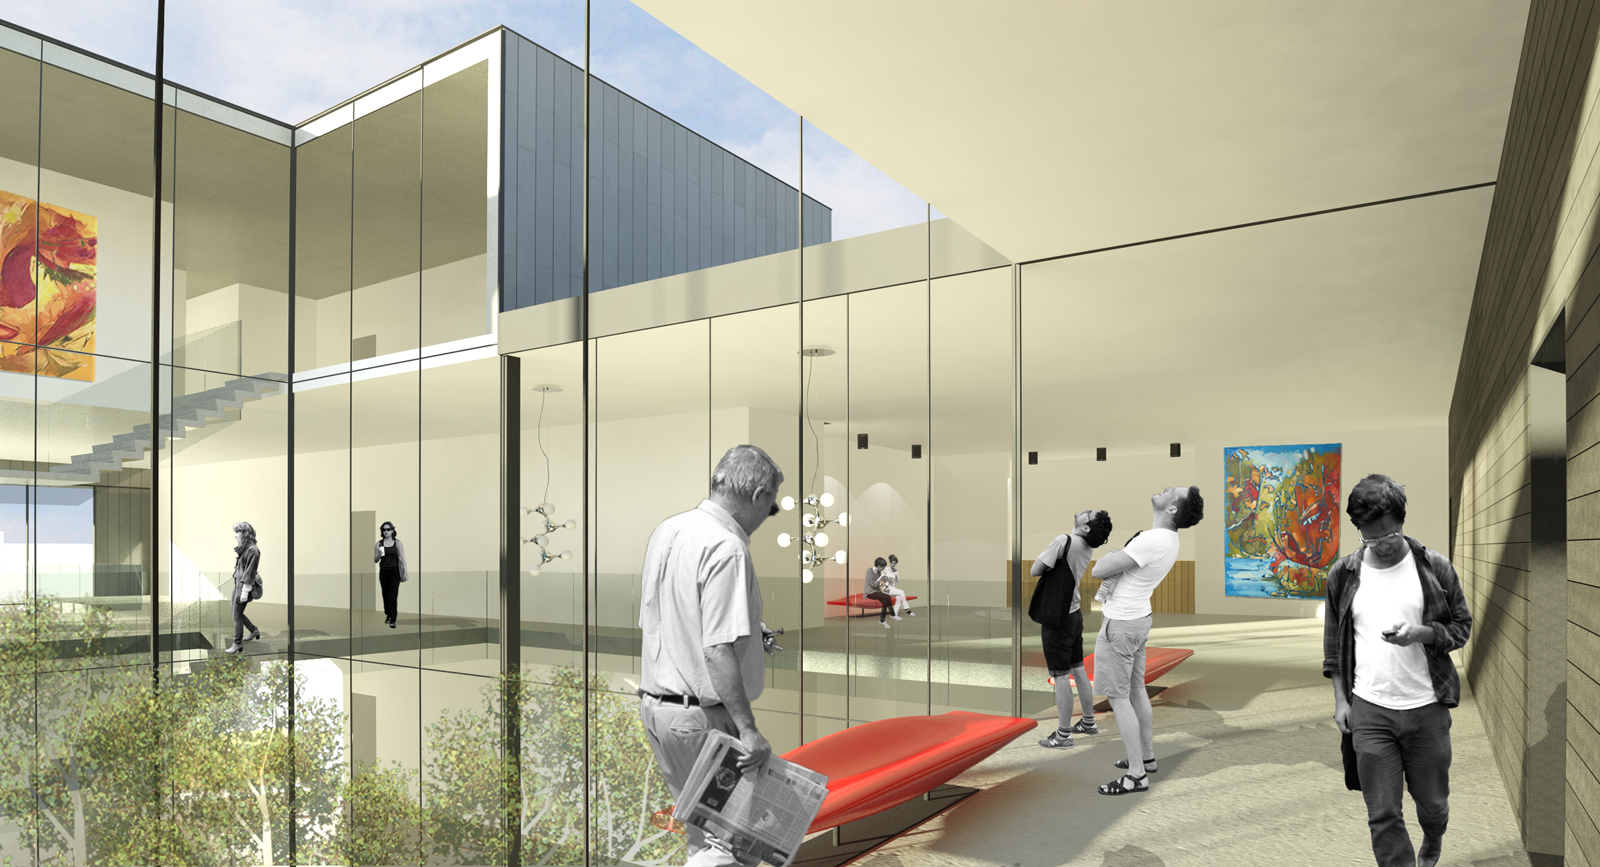 Competition - Victoriaville Cultural Center (contest)